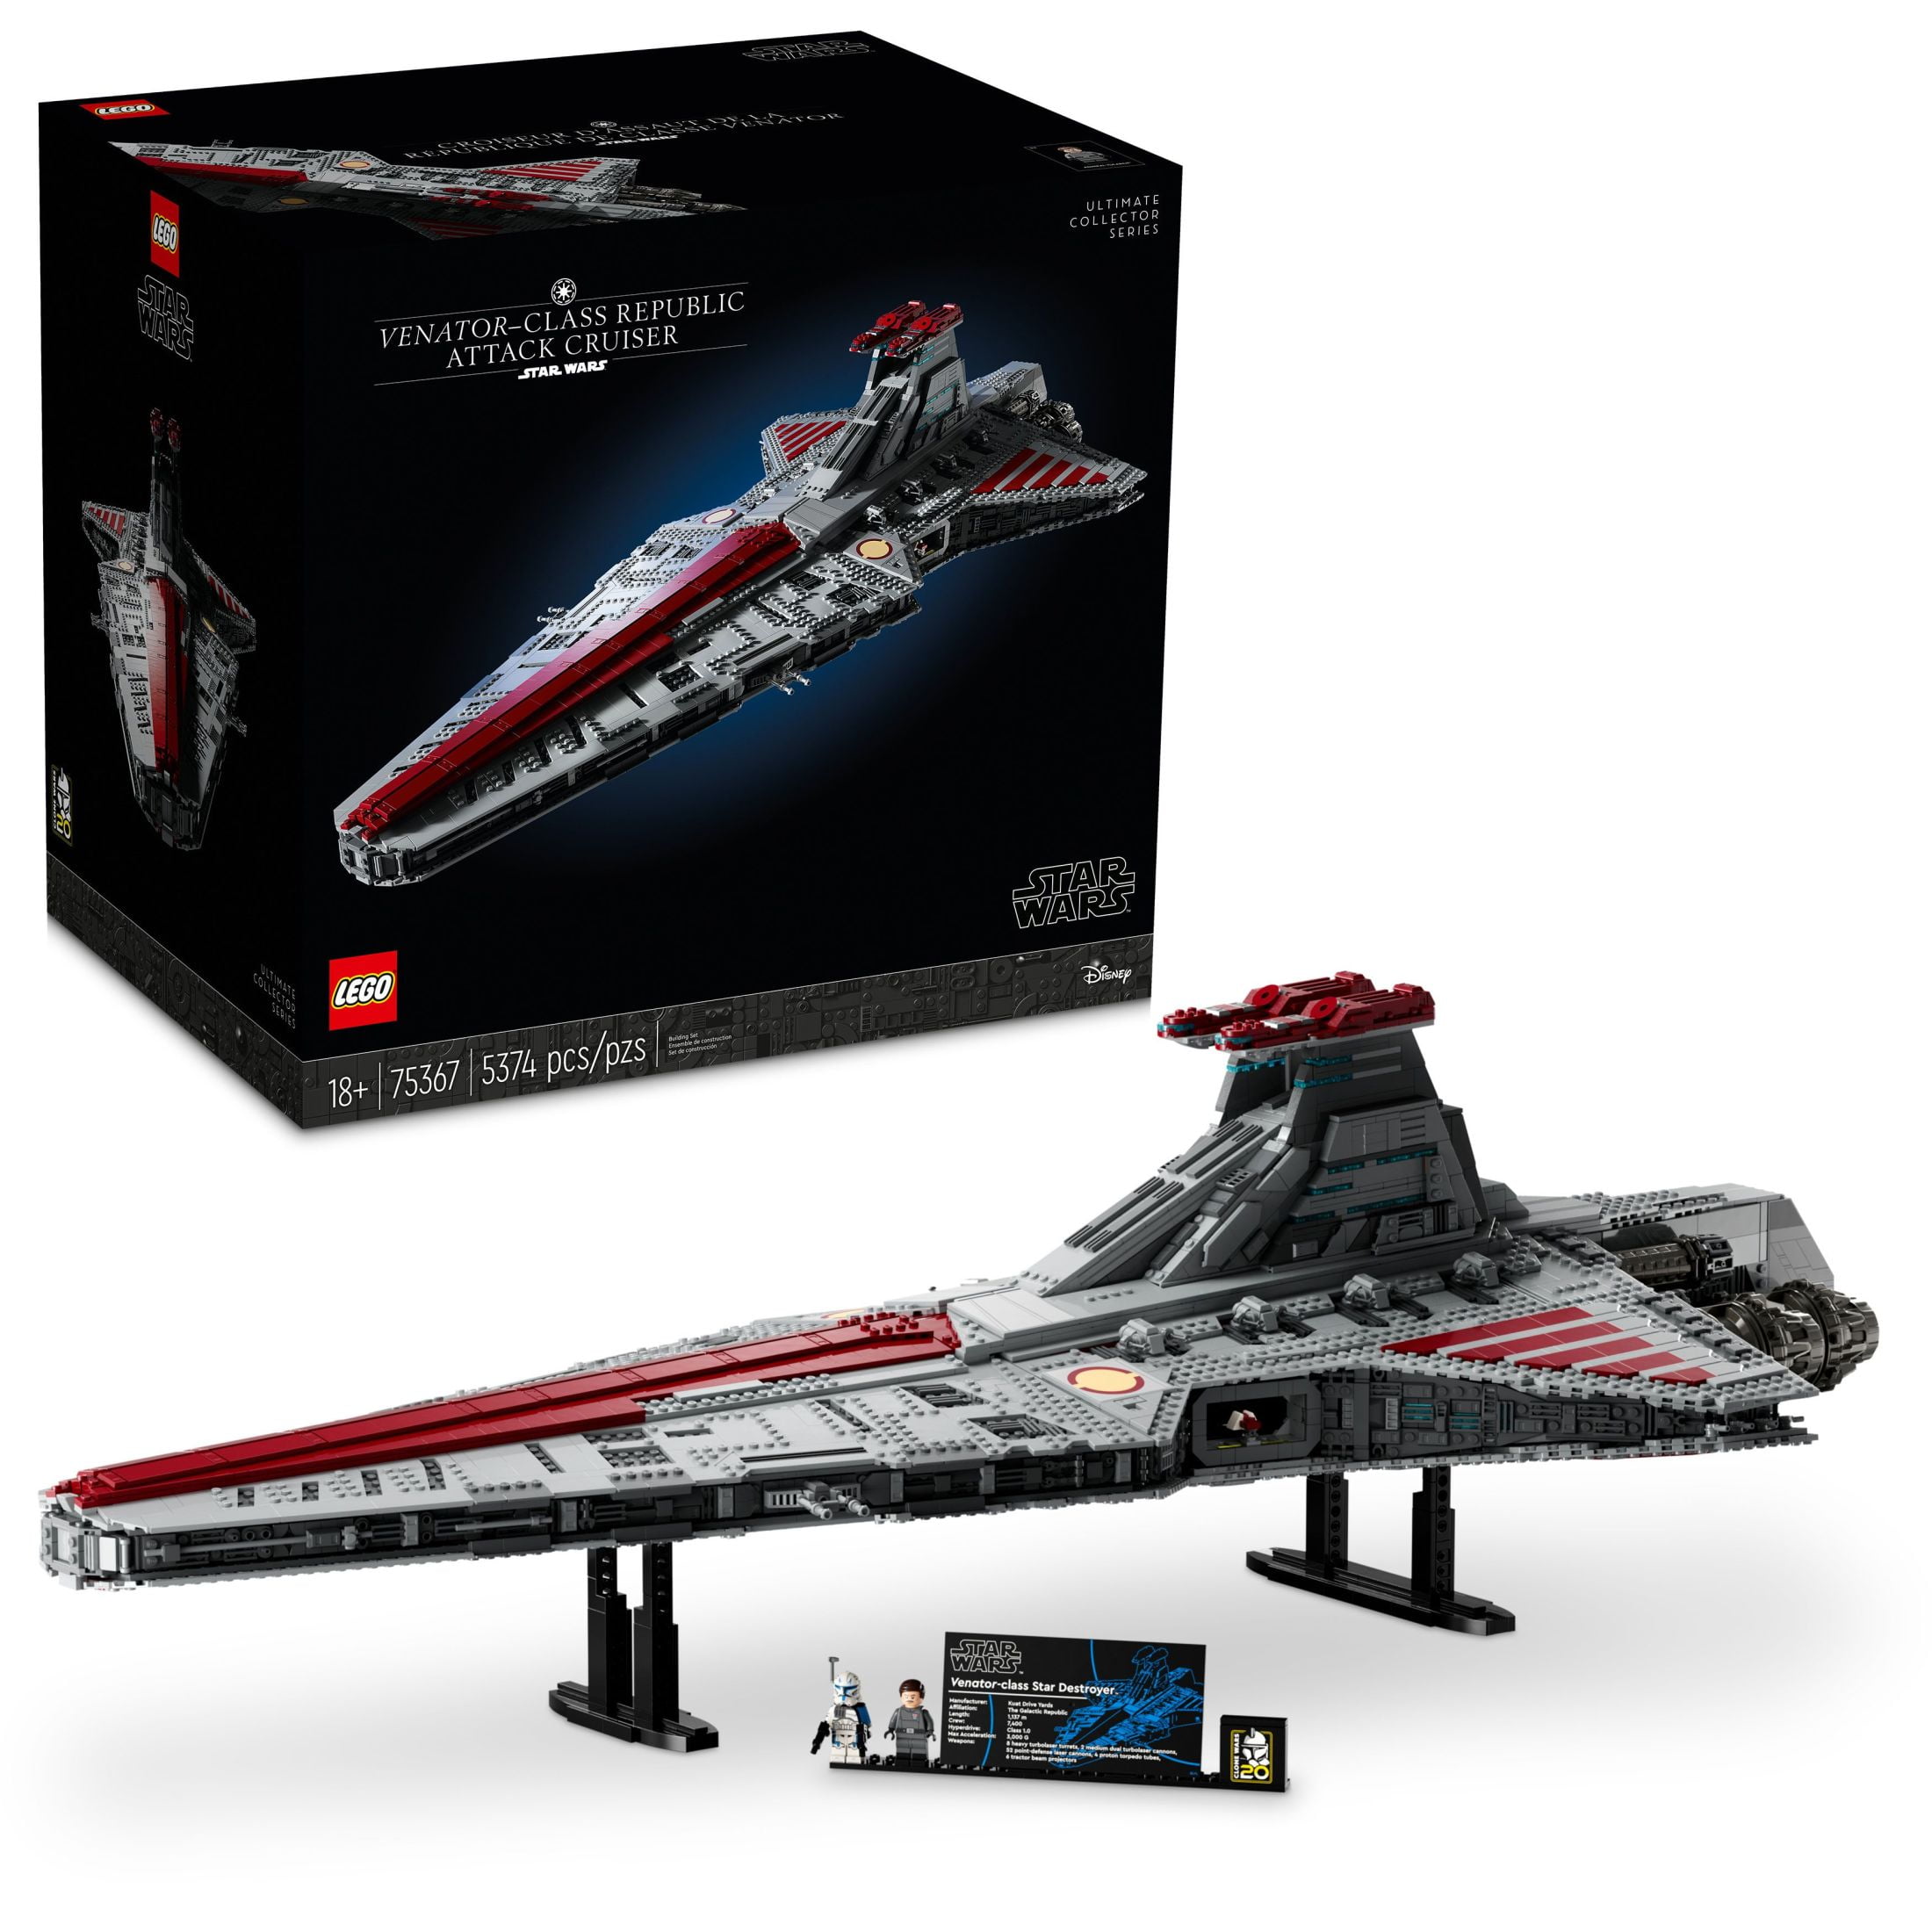 LEGO Star Wars Venator-Class Republic Attack Cruiser, Ultimate Collector  Series Building Set for Adults with Captain Rex Minifigure, Star Wars Gift,  